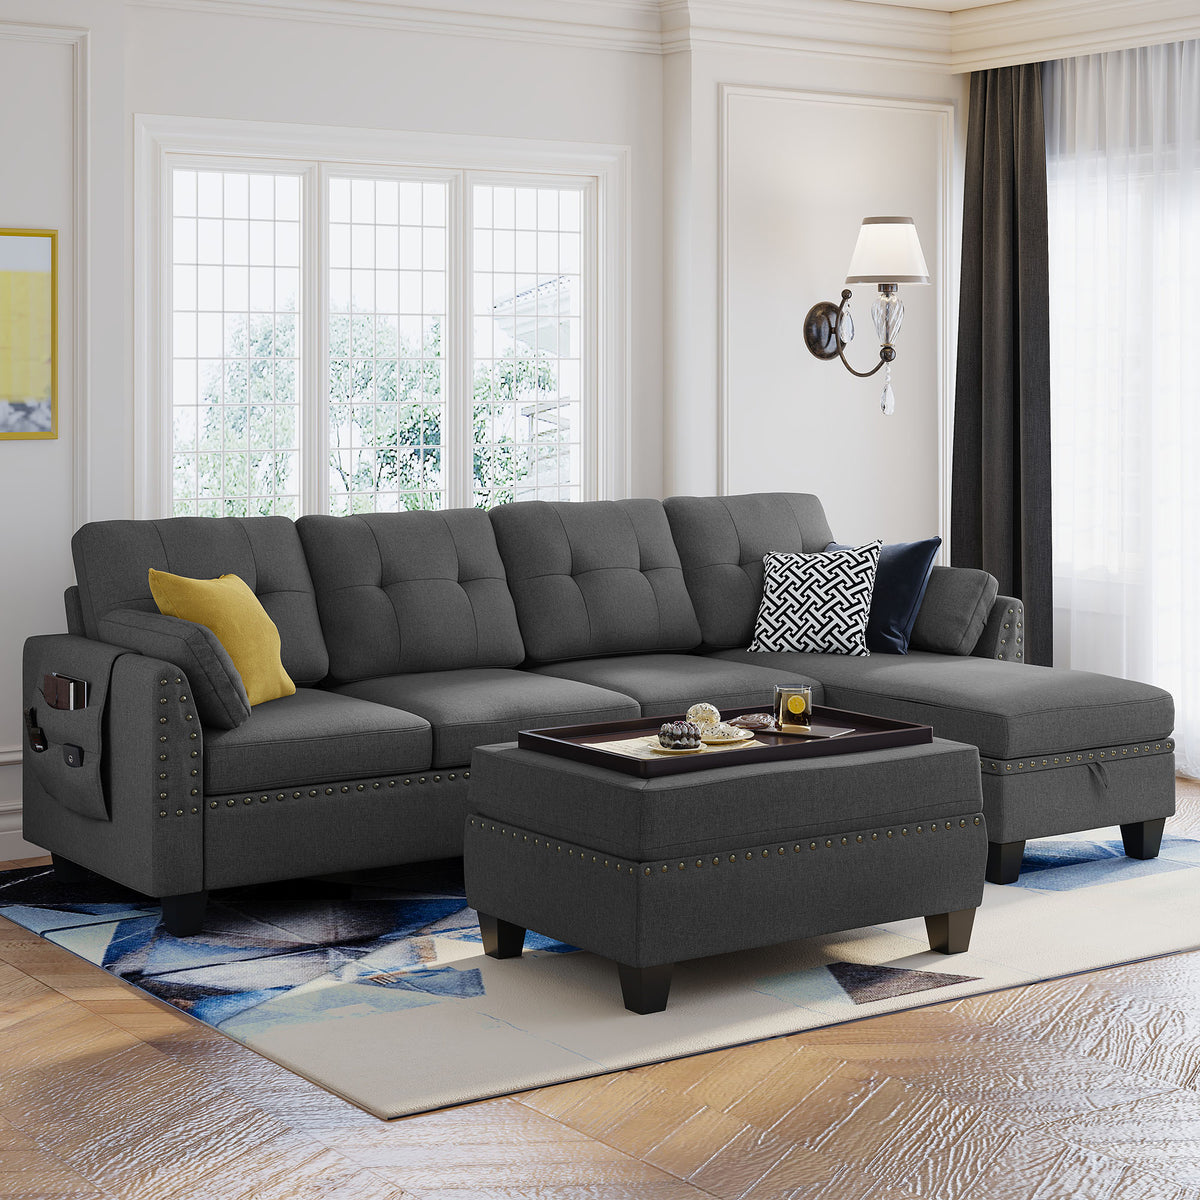 Modern L Shaped Sectional Sofa Couch Set with Tray Coffee Table Ottoman ...